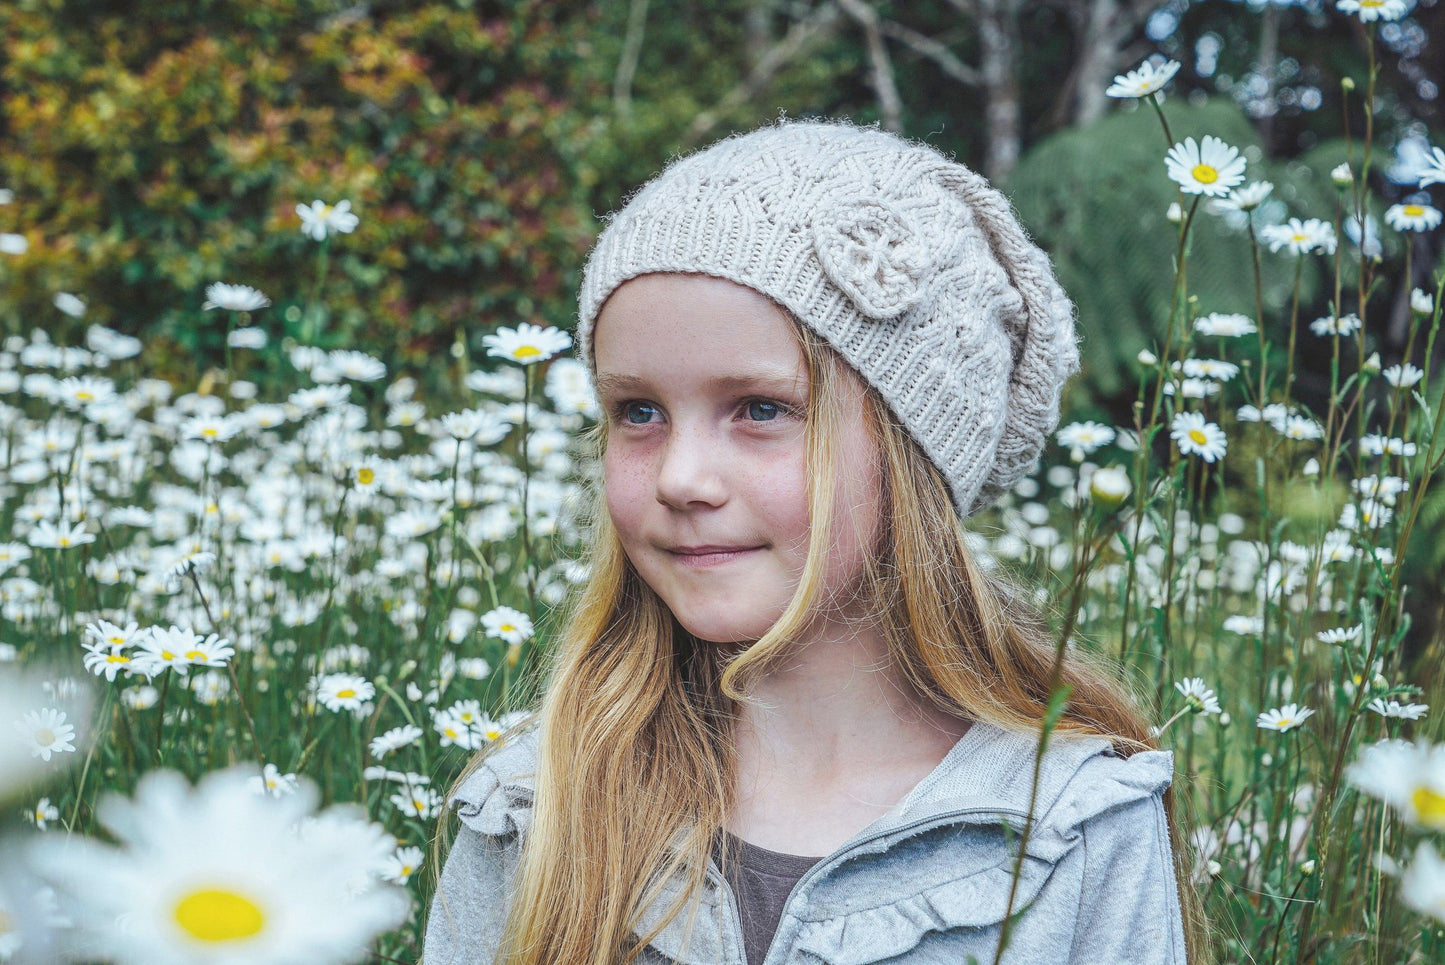 Brittany Slouch Knit Pattern